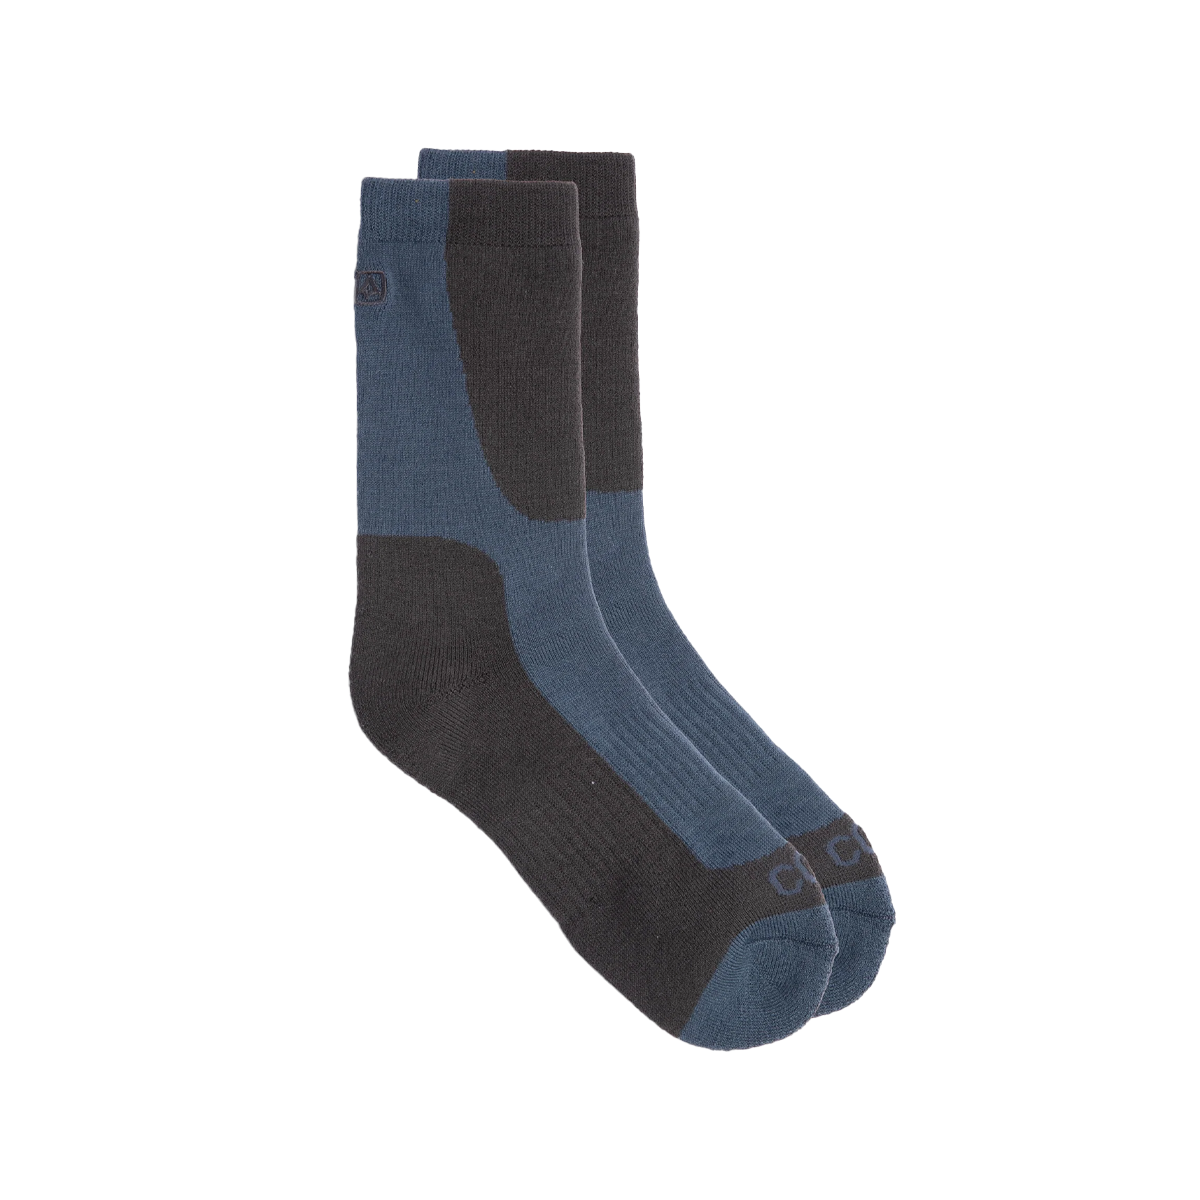 Coal The Technical Crew Sock - Assorted Colors